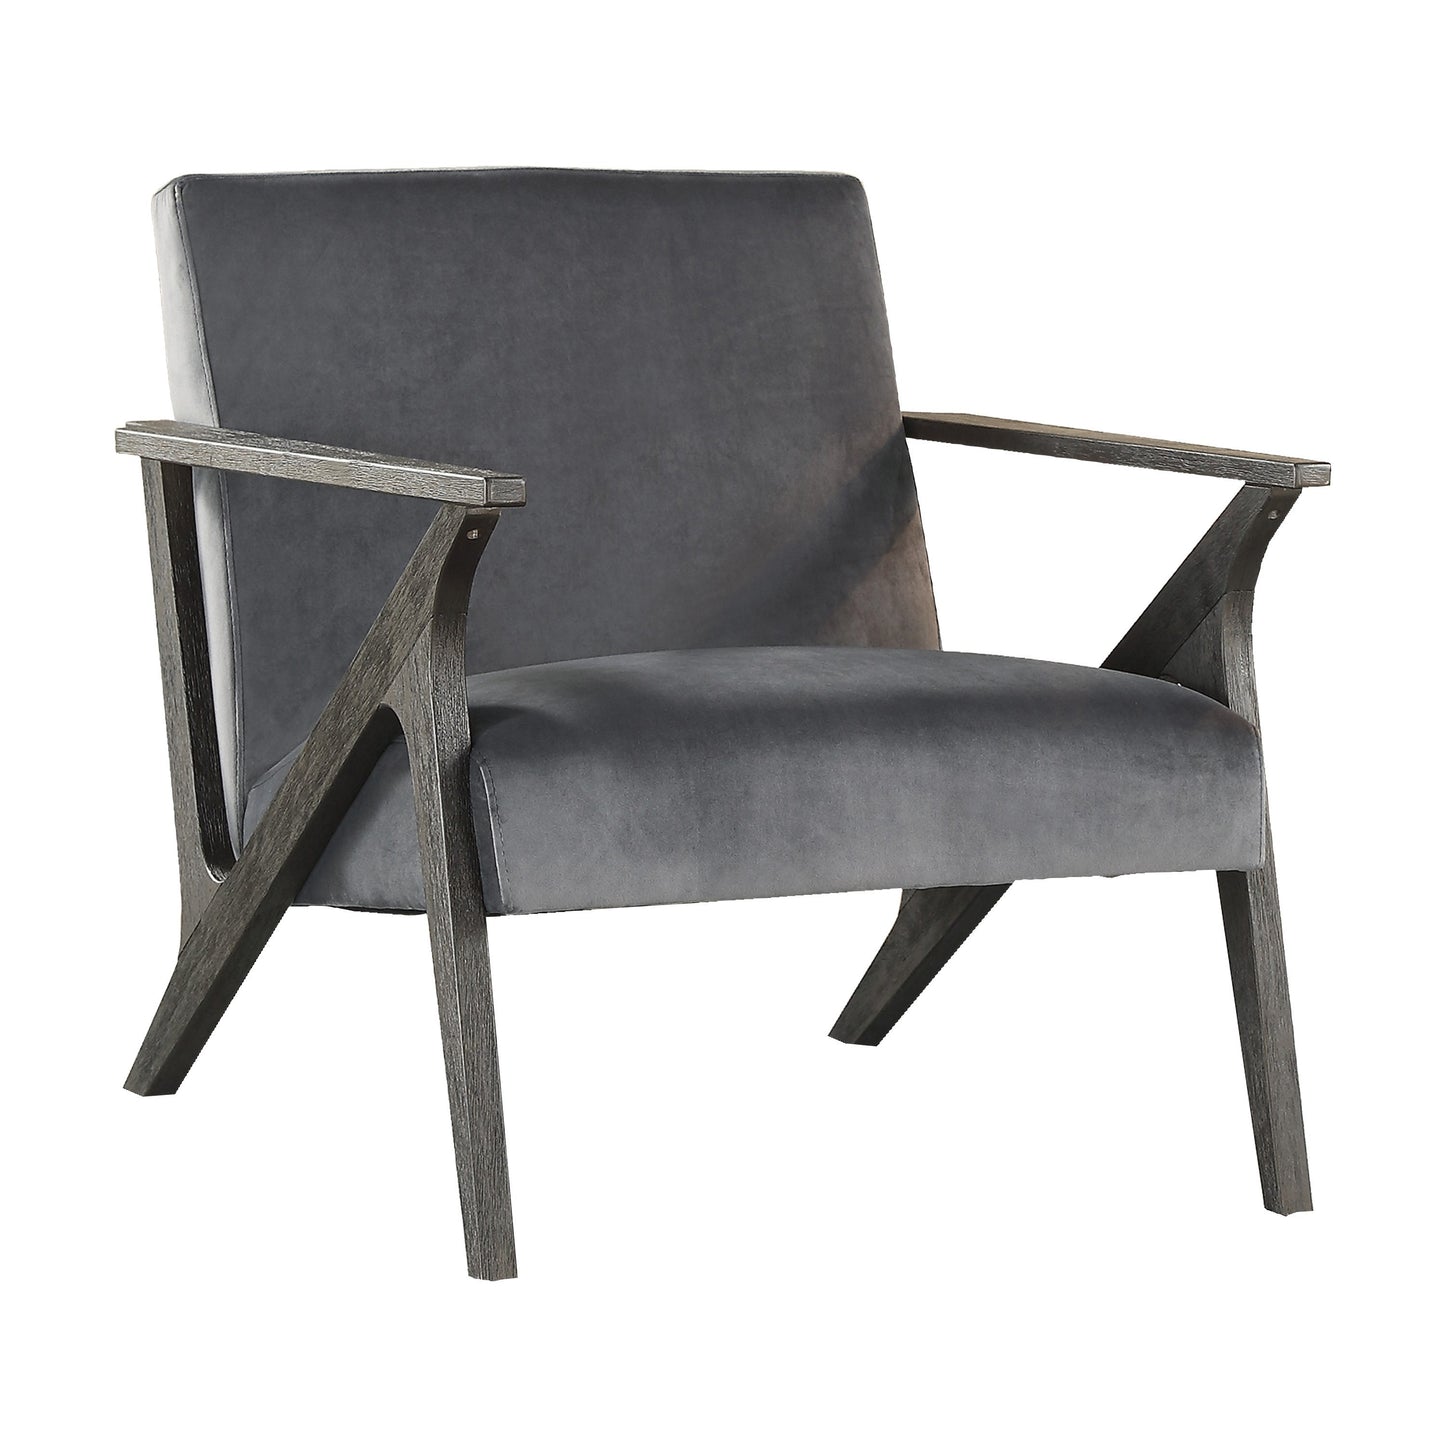 Retro Style Velvet Upholstered Gray Accent Chair 1pc Solid Rubberwood Antique Gray Finish Modern Home Furniture